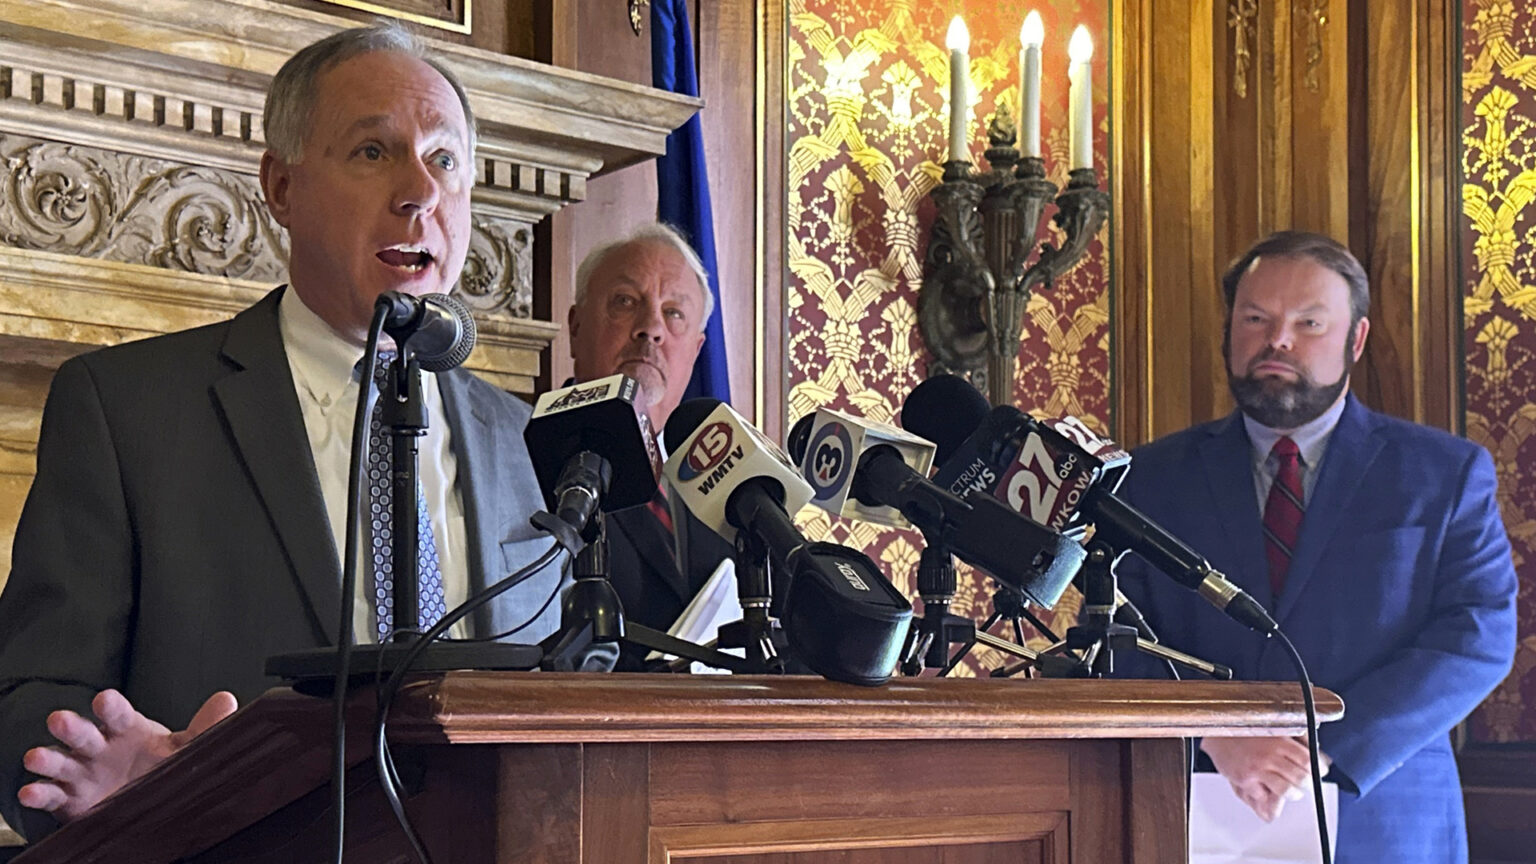 Robin Vos stands and speaks into multiple microphones with the flags of different media organizations mounted to the top of a wood podium, with two other people standing behind him and to his side, in a room with a carved fireplace lintel, the Wisconsin flag, electric wall sconces and toile wallpaper.